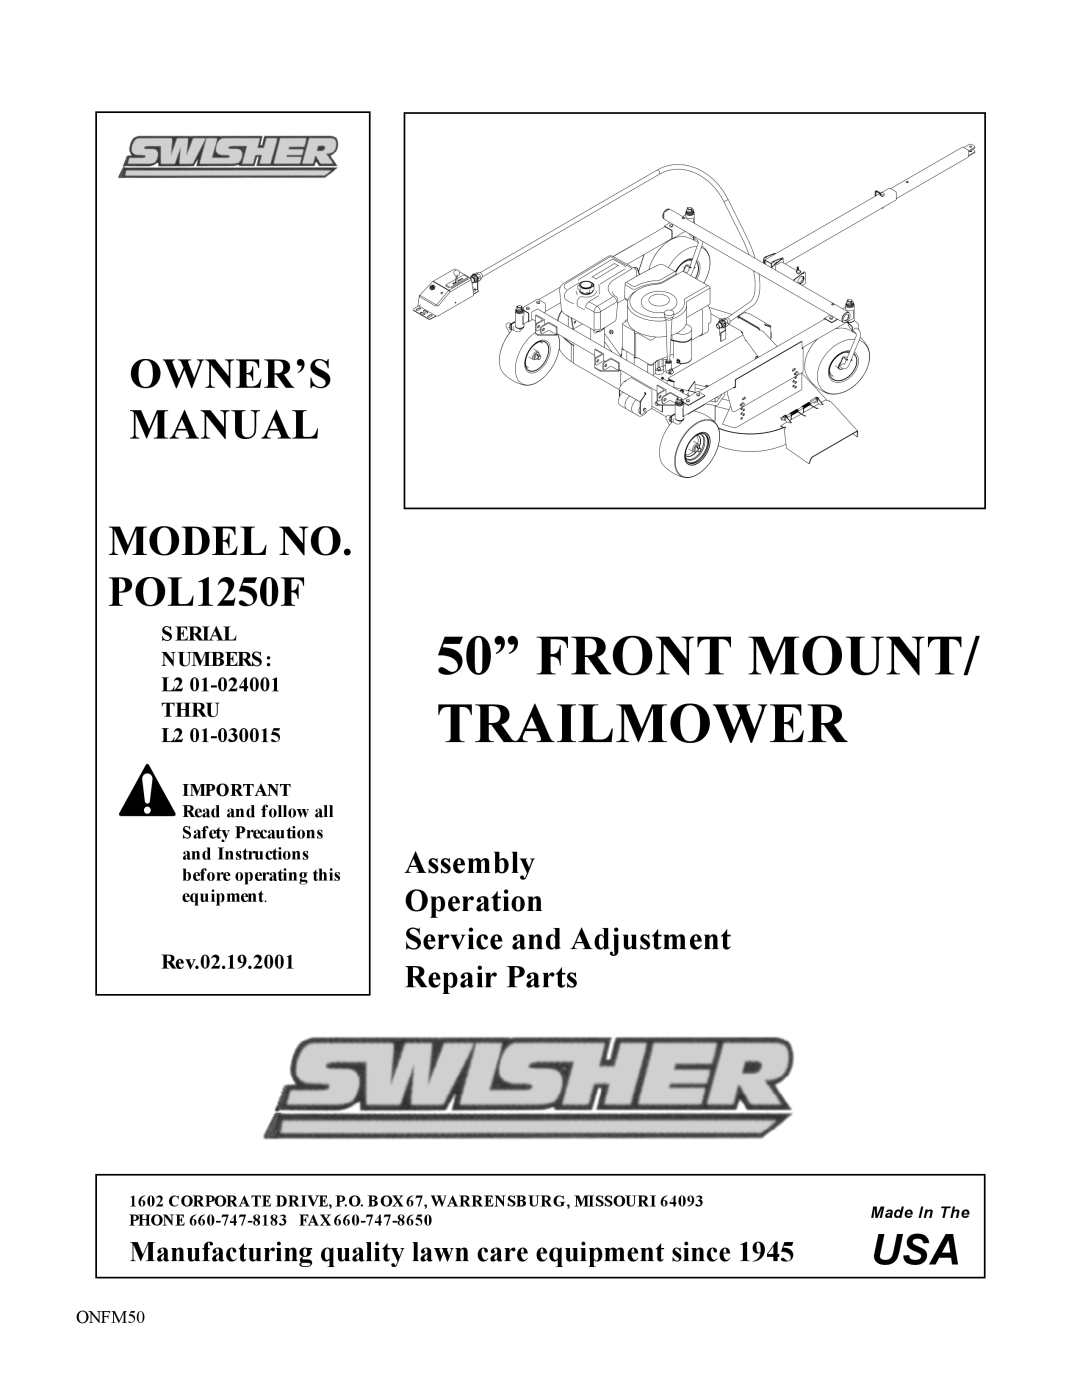 Swisher pol1250f owner manual SERIAL NUMBERS L2 THRU L2, Rev.02.19.2001, 50” FRONT MOUNT/ TRAILMOWER, Made In The 